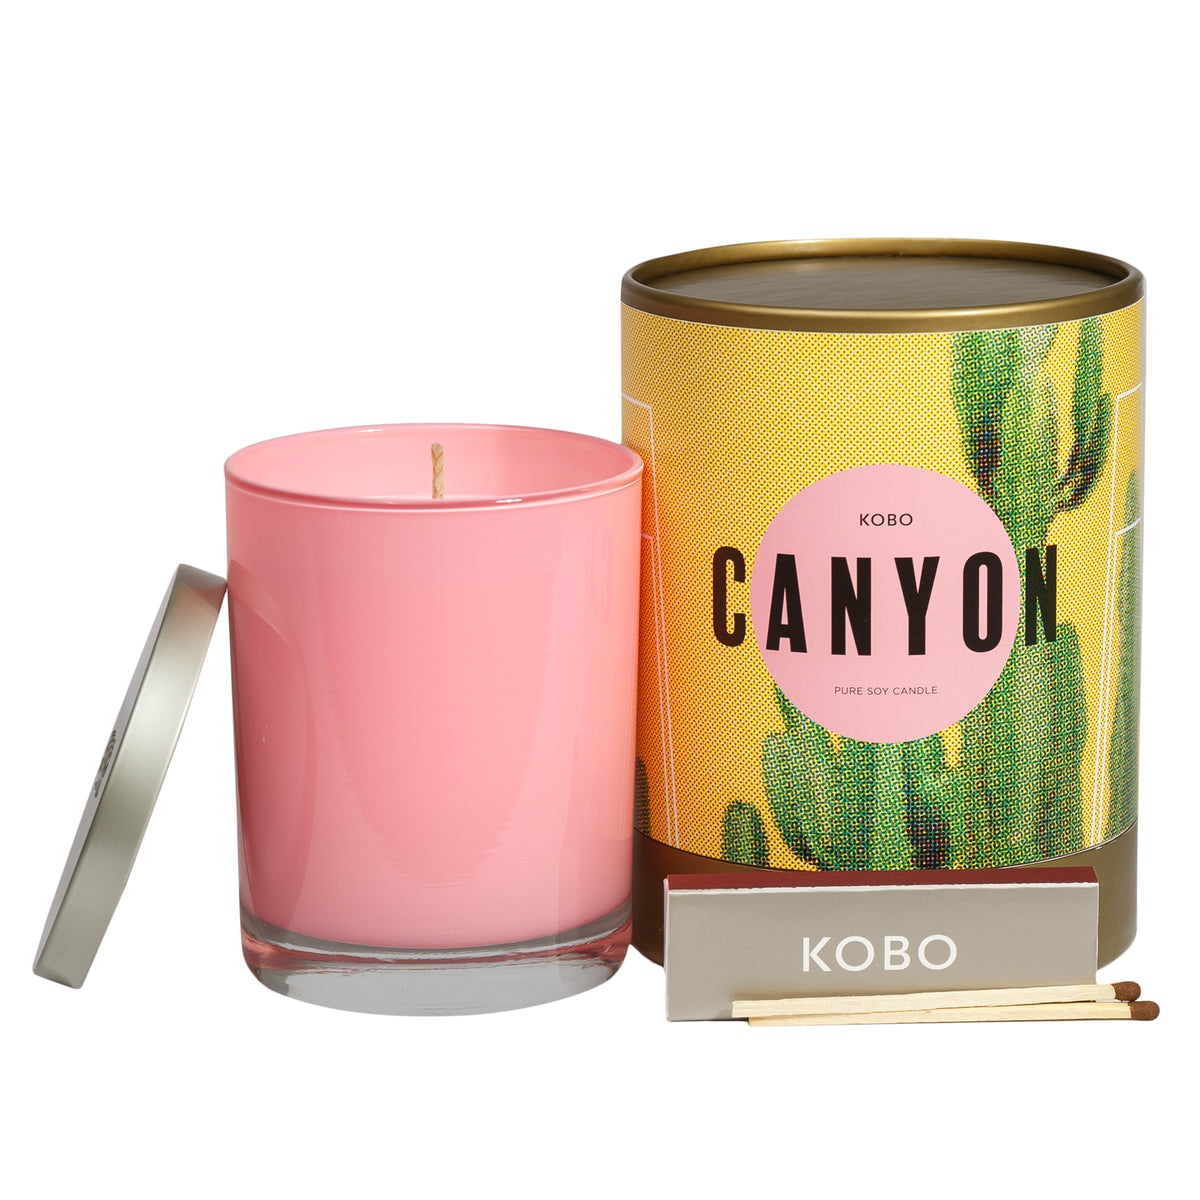 Primary Image of Canyon Road Trip Candle